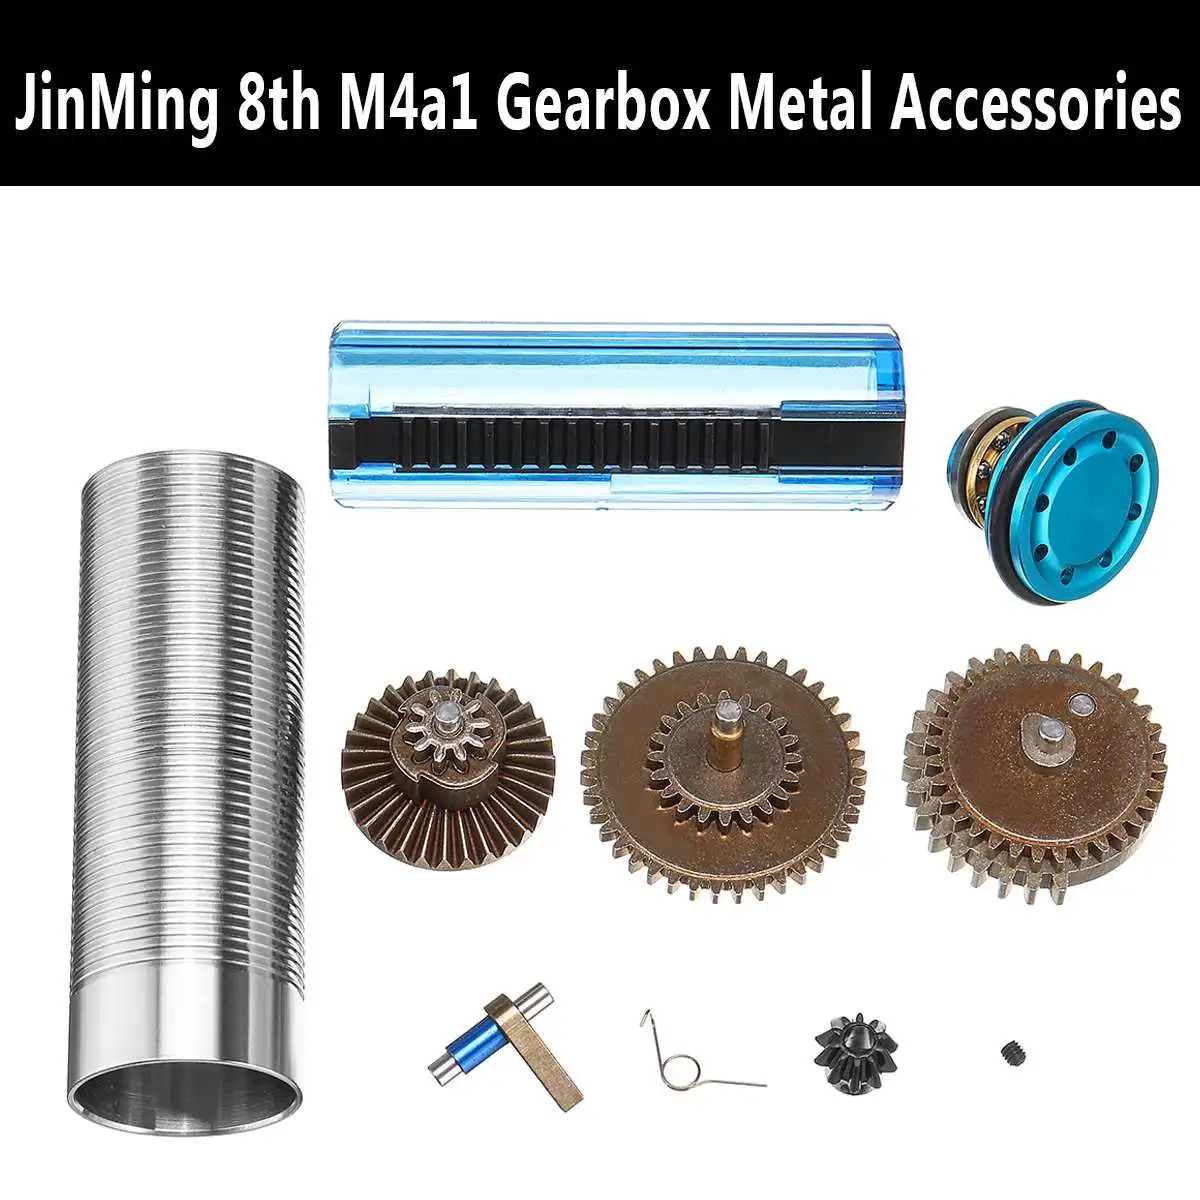 

18:1Toy Upgrade Gearbox Metal Parts JinMing 8th M4a1 Accessories Gel Ball